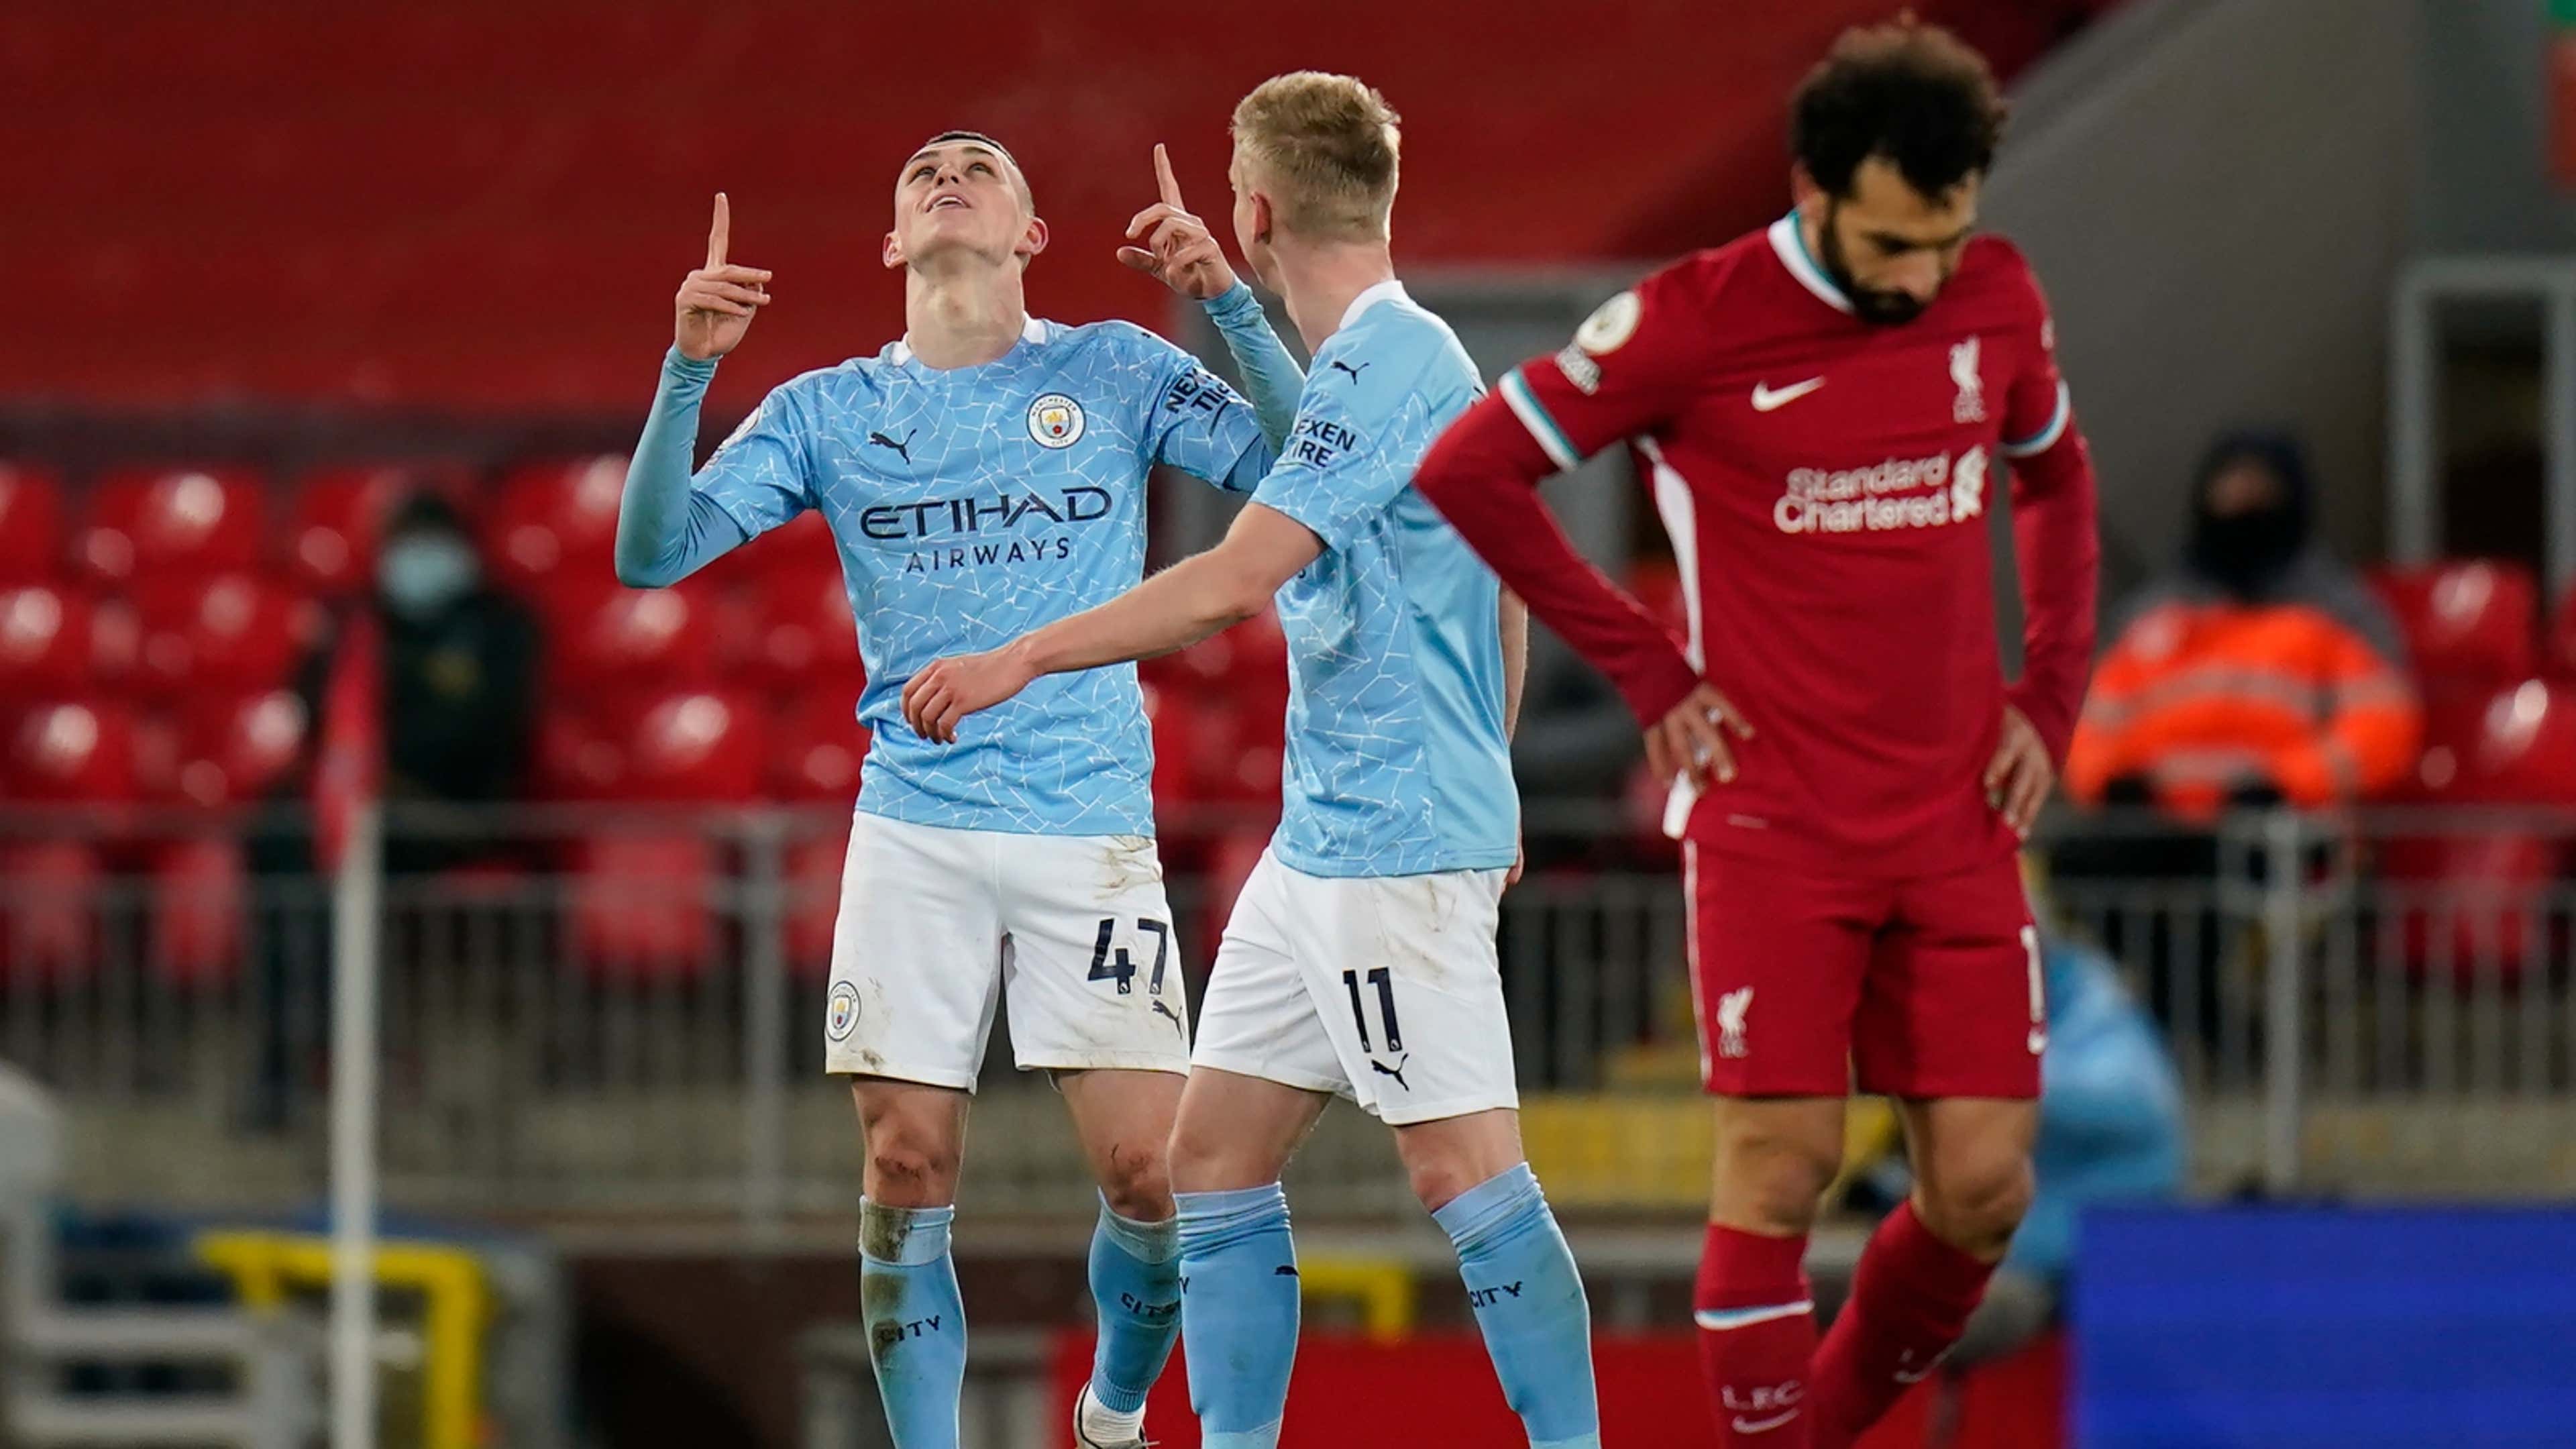 Man City vs Liverpool: Prediction and Preview